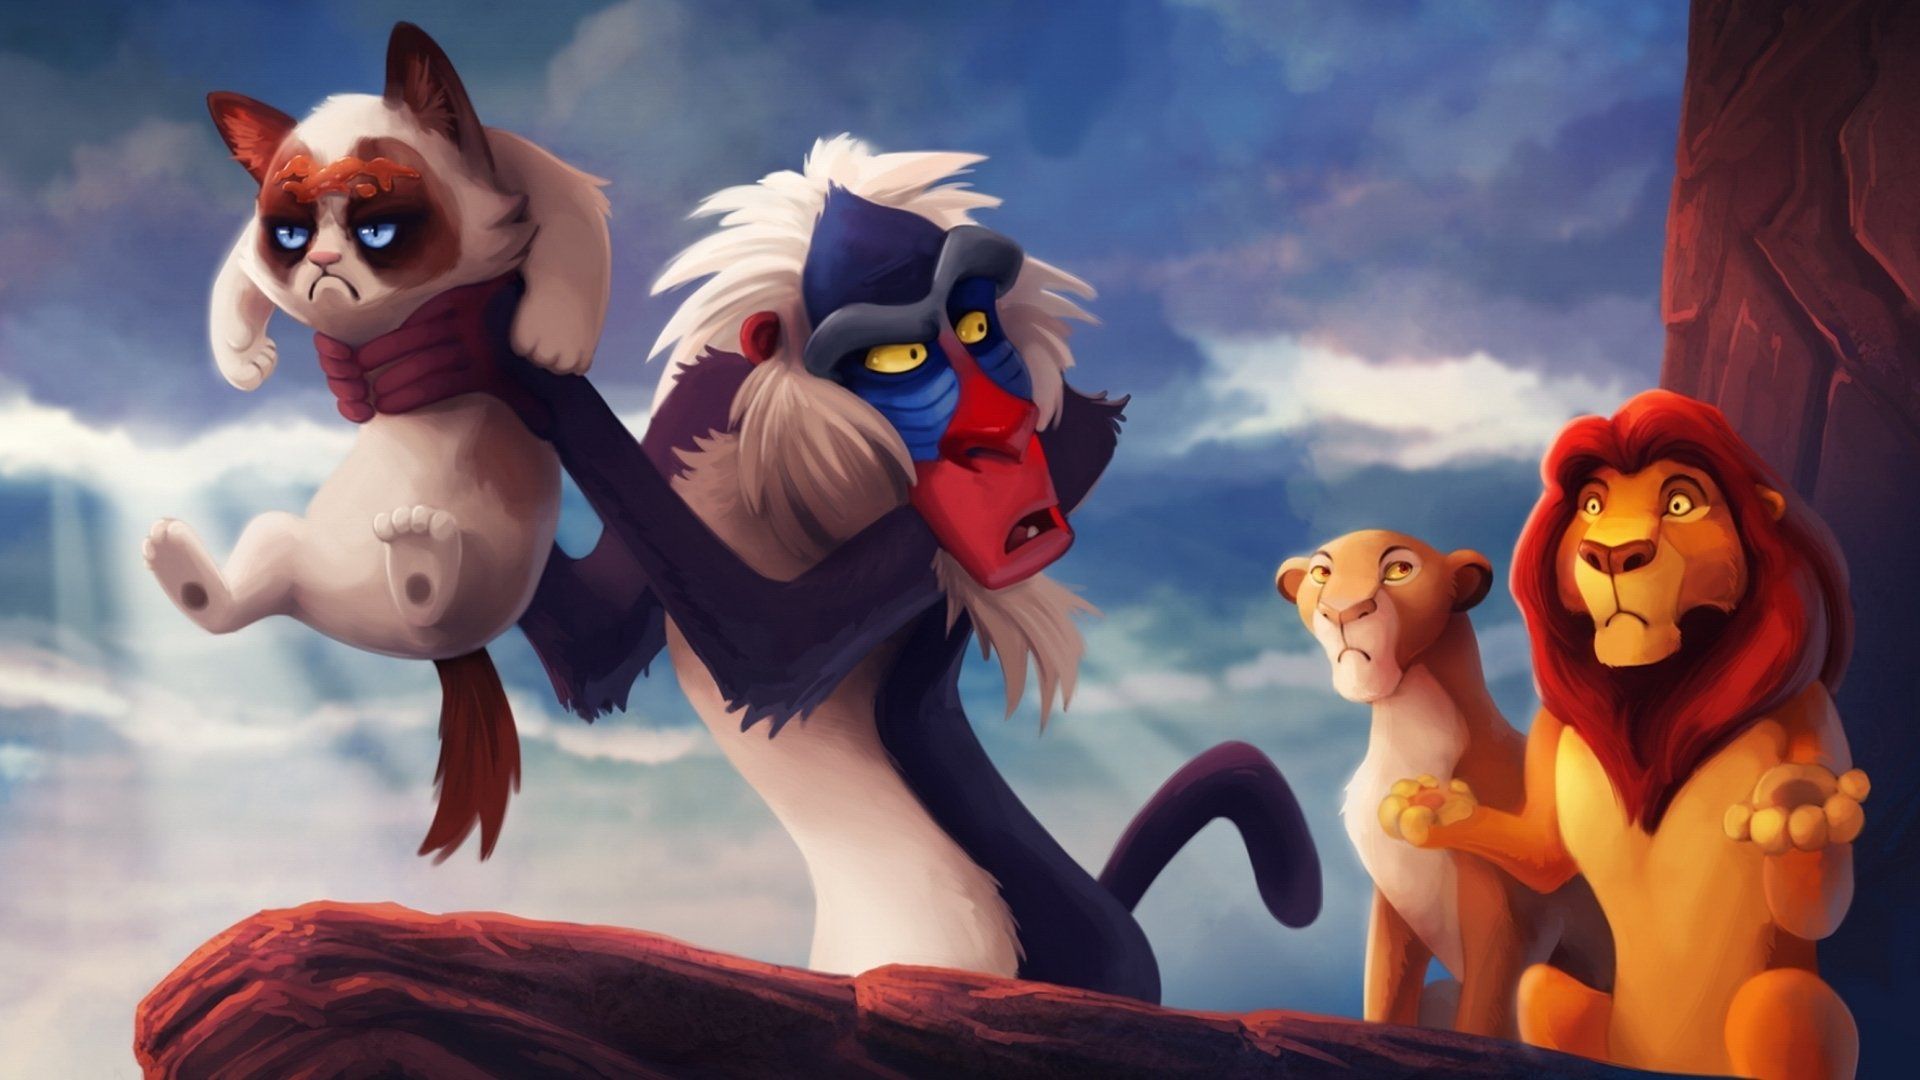 The lion king characters are shown in a cartoon - The Lion King